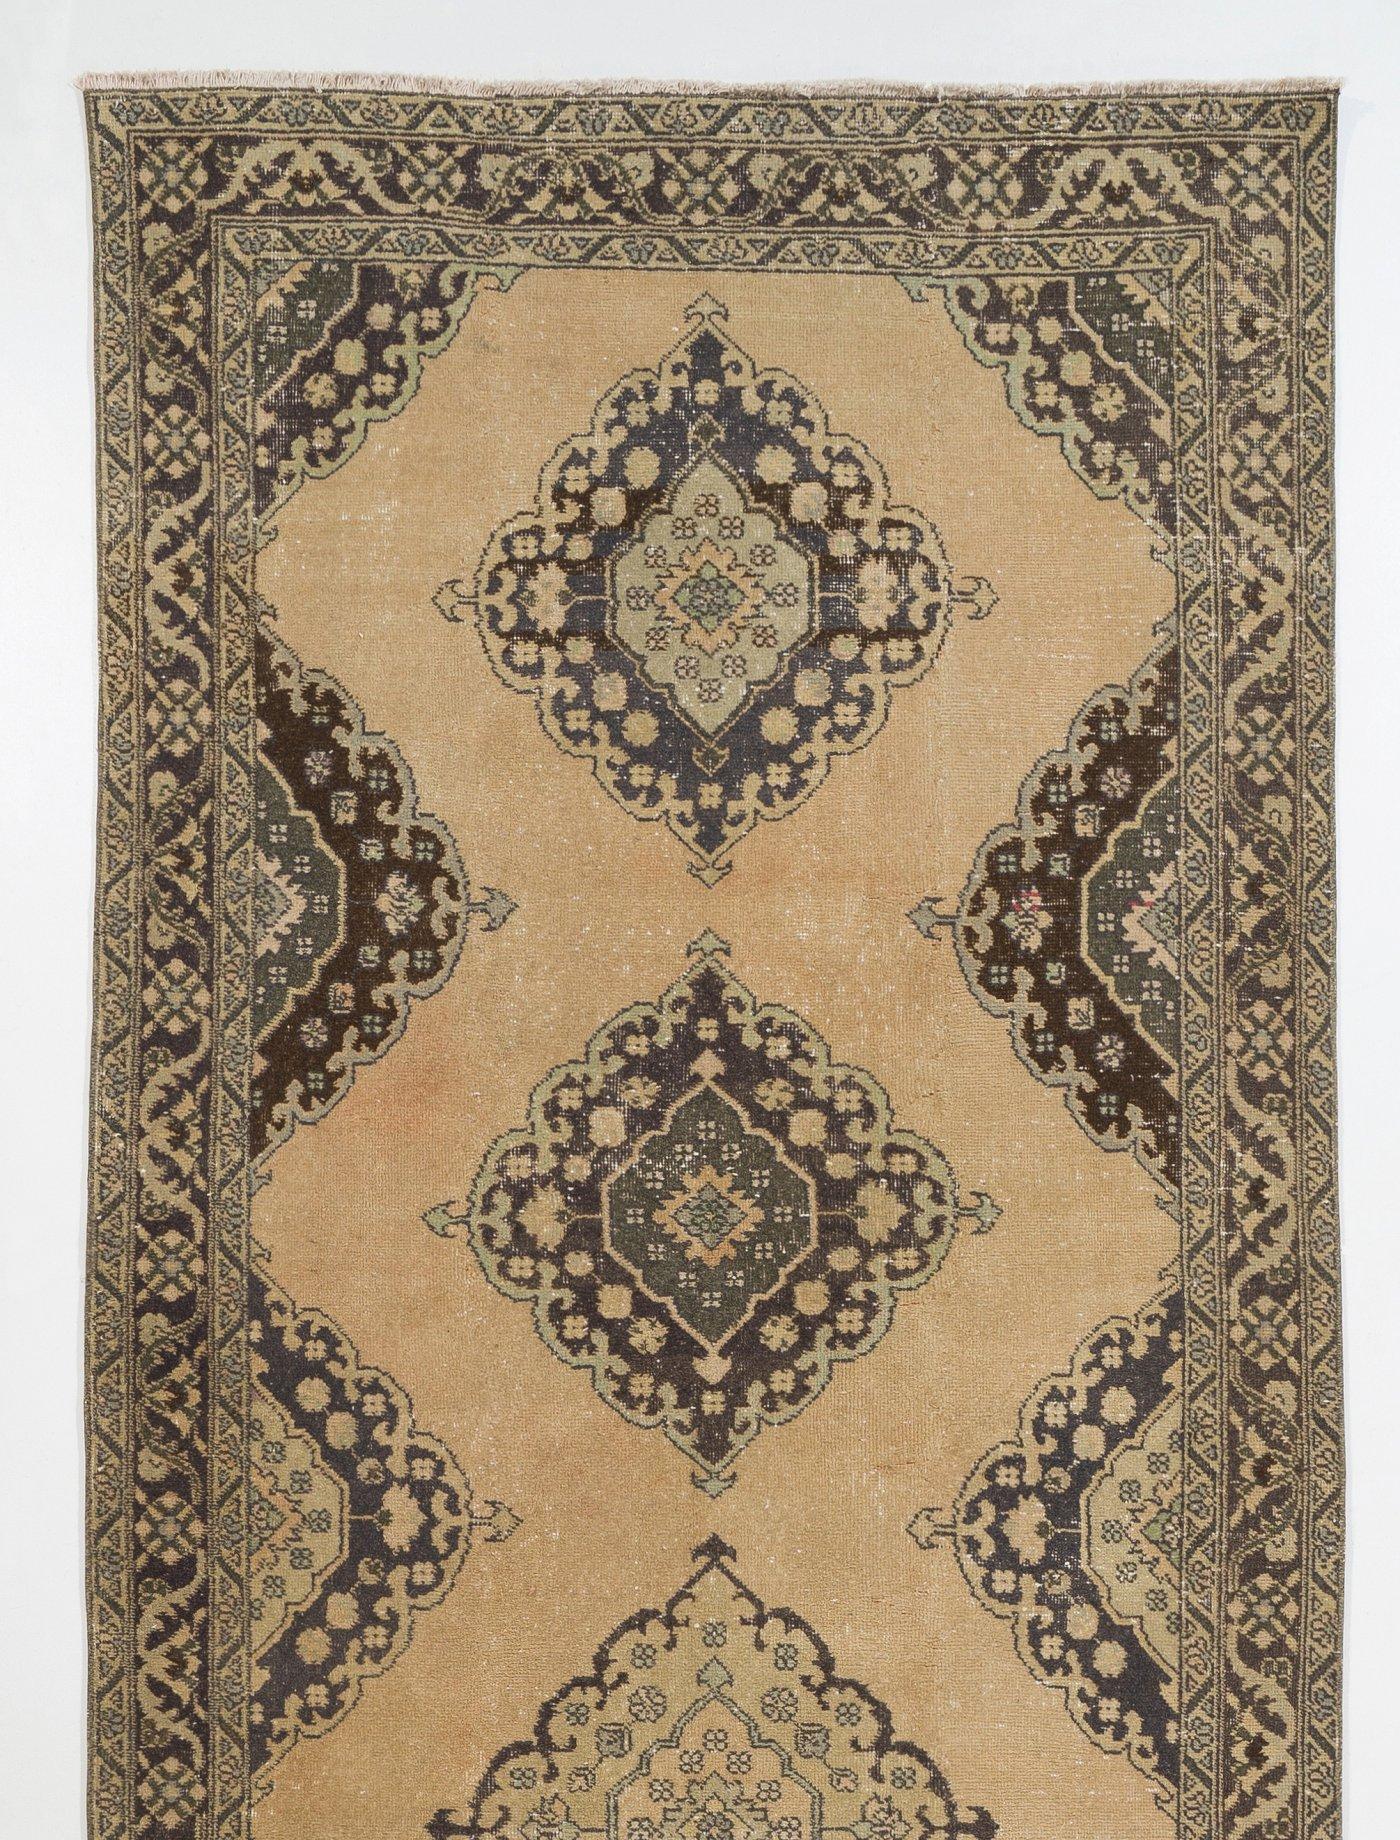 A vintage Turkish runner rug in beige, green and brown colors. It was hand-knotted in the 1960s with low wool on cotton foundation and features a multiple medallion design. It is in very good condition, professionally-washed, sturdy and suitable for